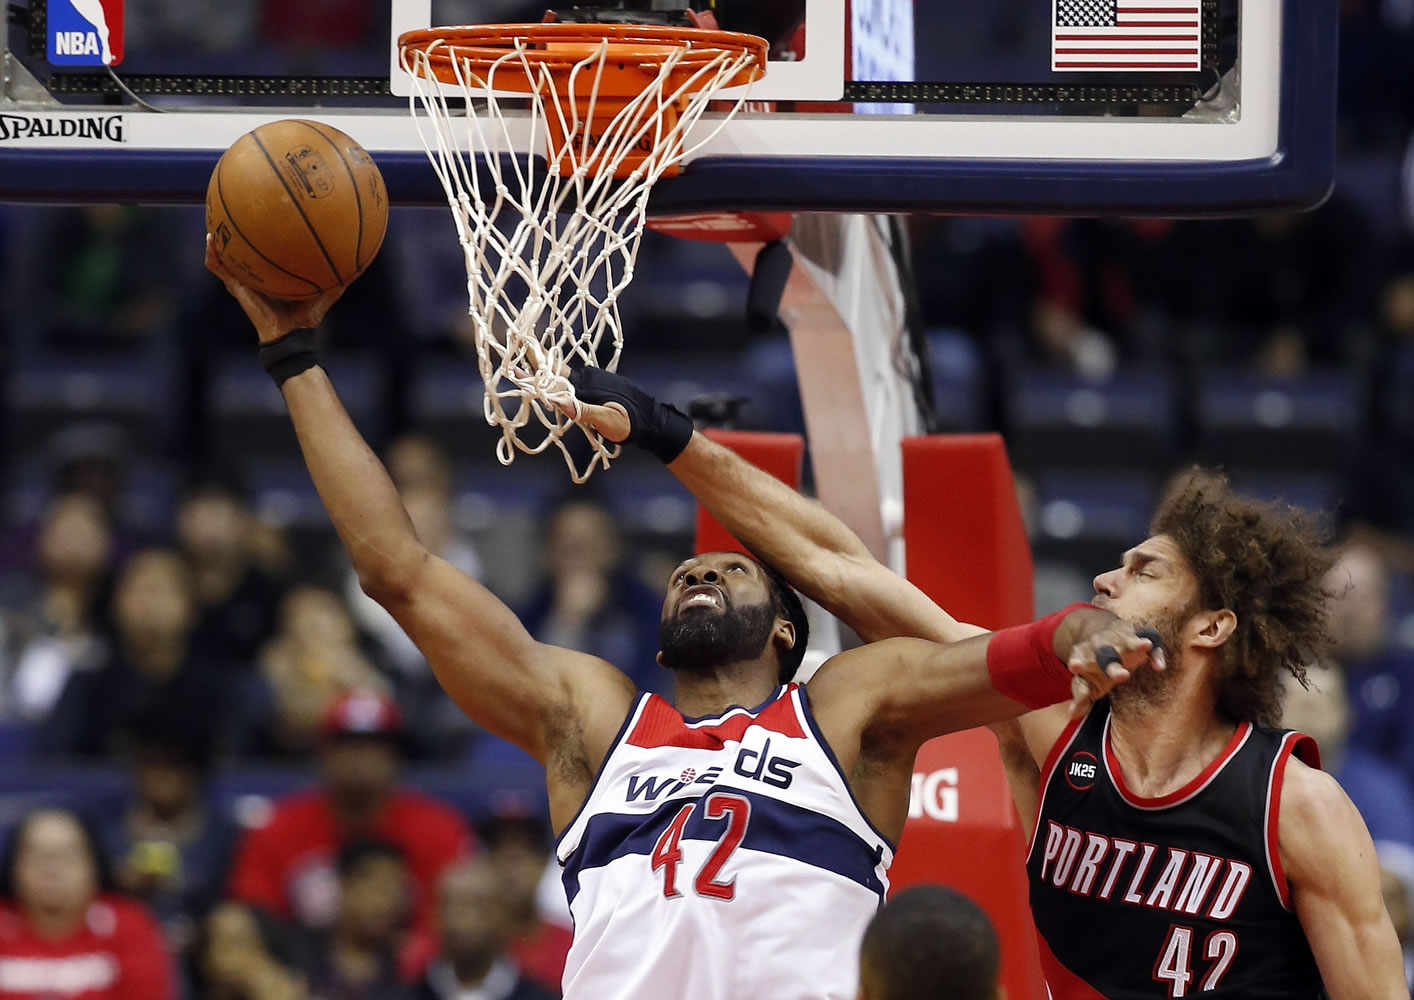 Washington Wizards forward Nene (42), from Brazil, shoots as Portland Trail Blazers center Robin Lopez (42) defends in the first half of an NBA basketball game Monday, March 16, 2015, in Washington.